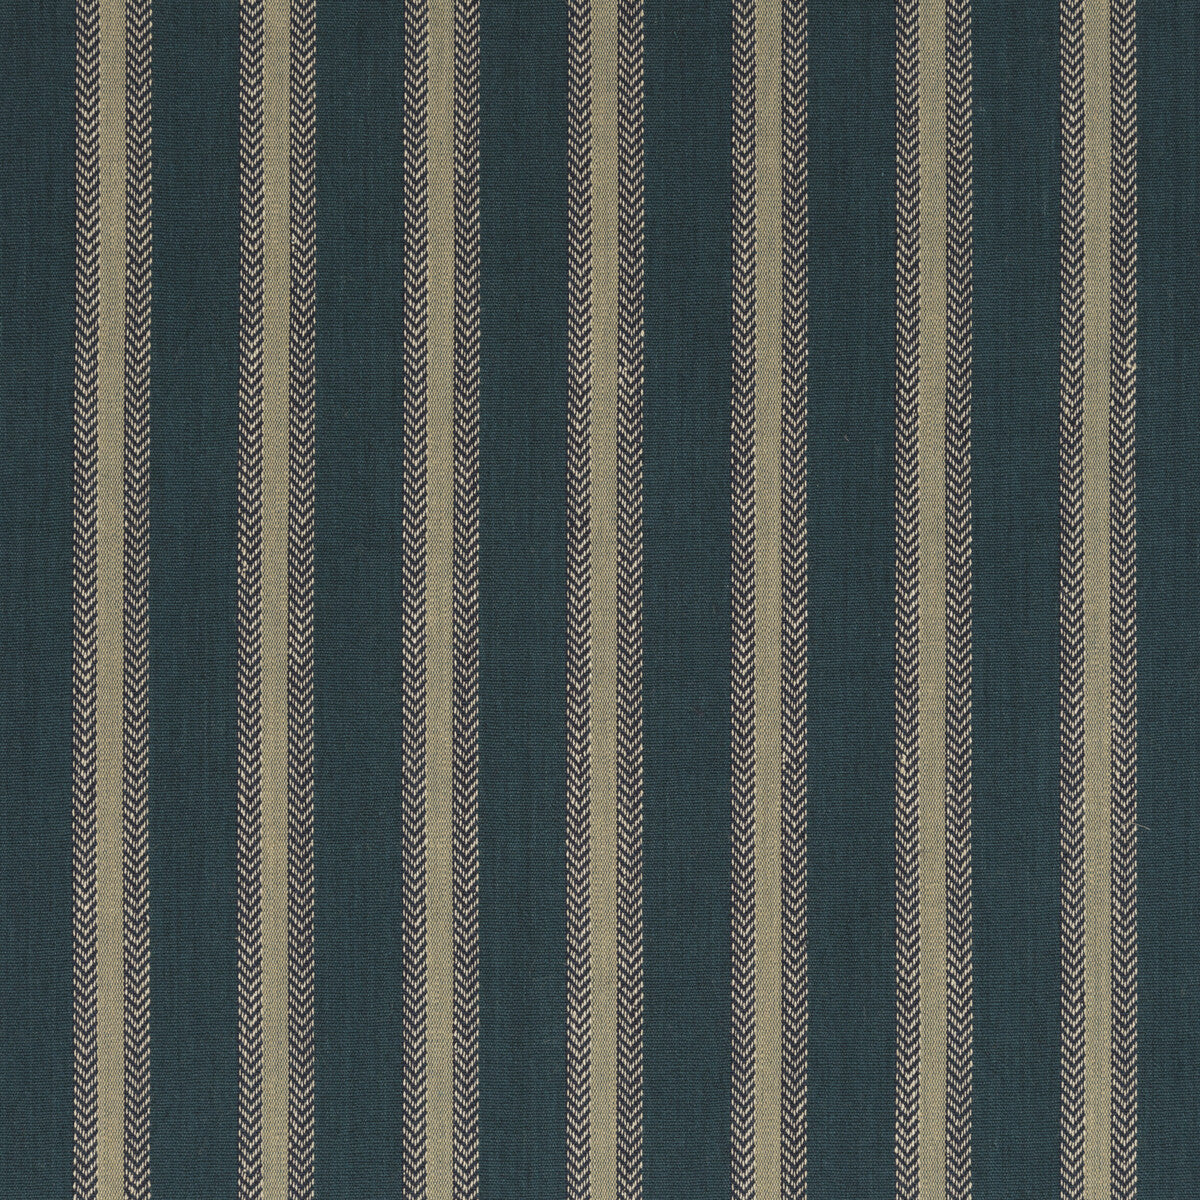 Chester Stripe fabric in teal color - pattern FD760.R11.0 - by Mulberry in the Festival collection